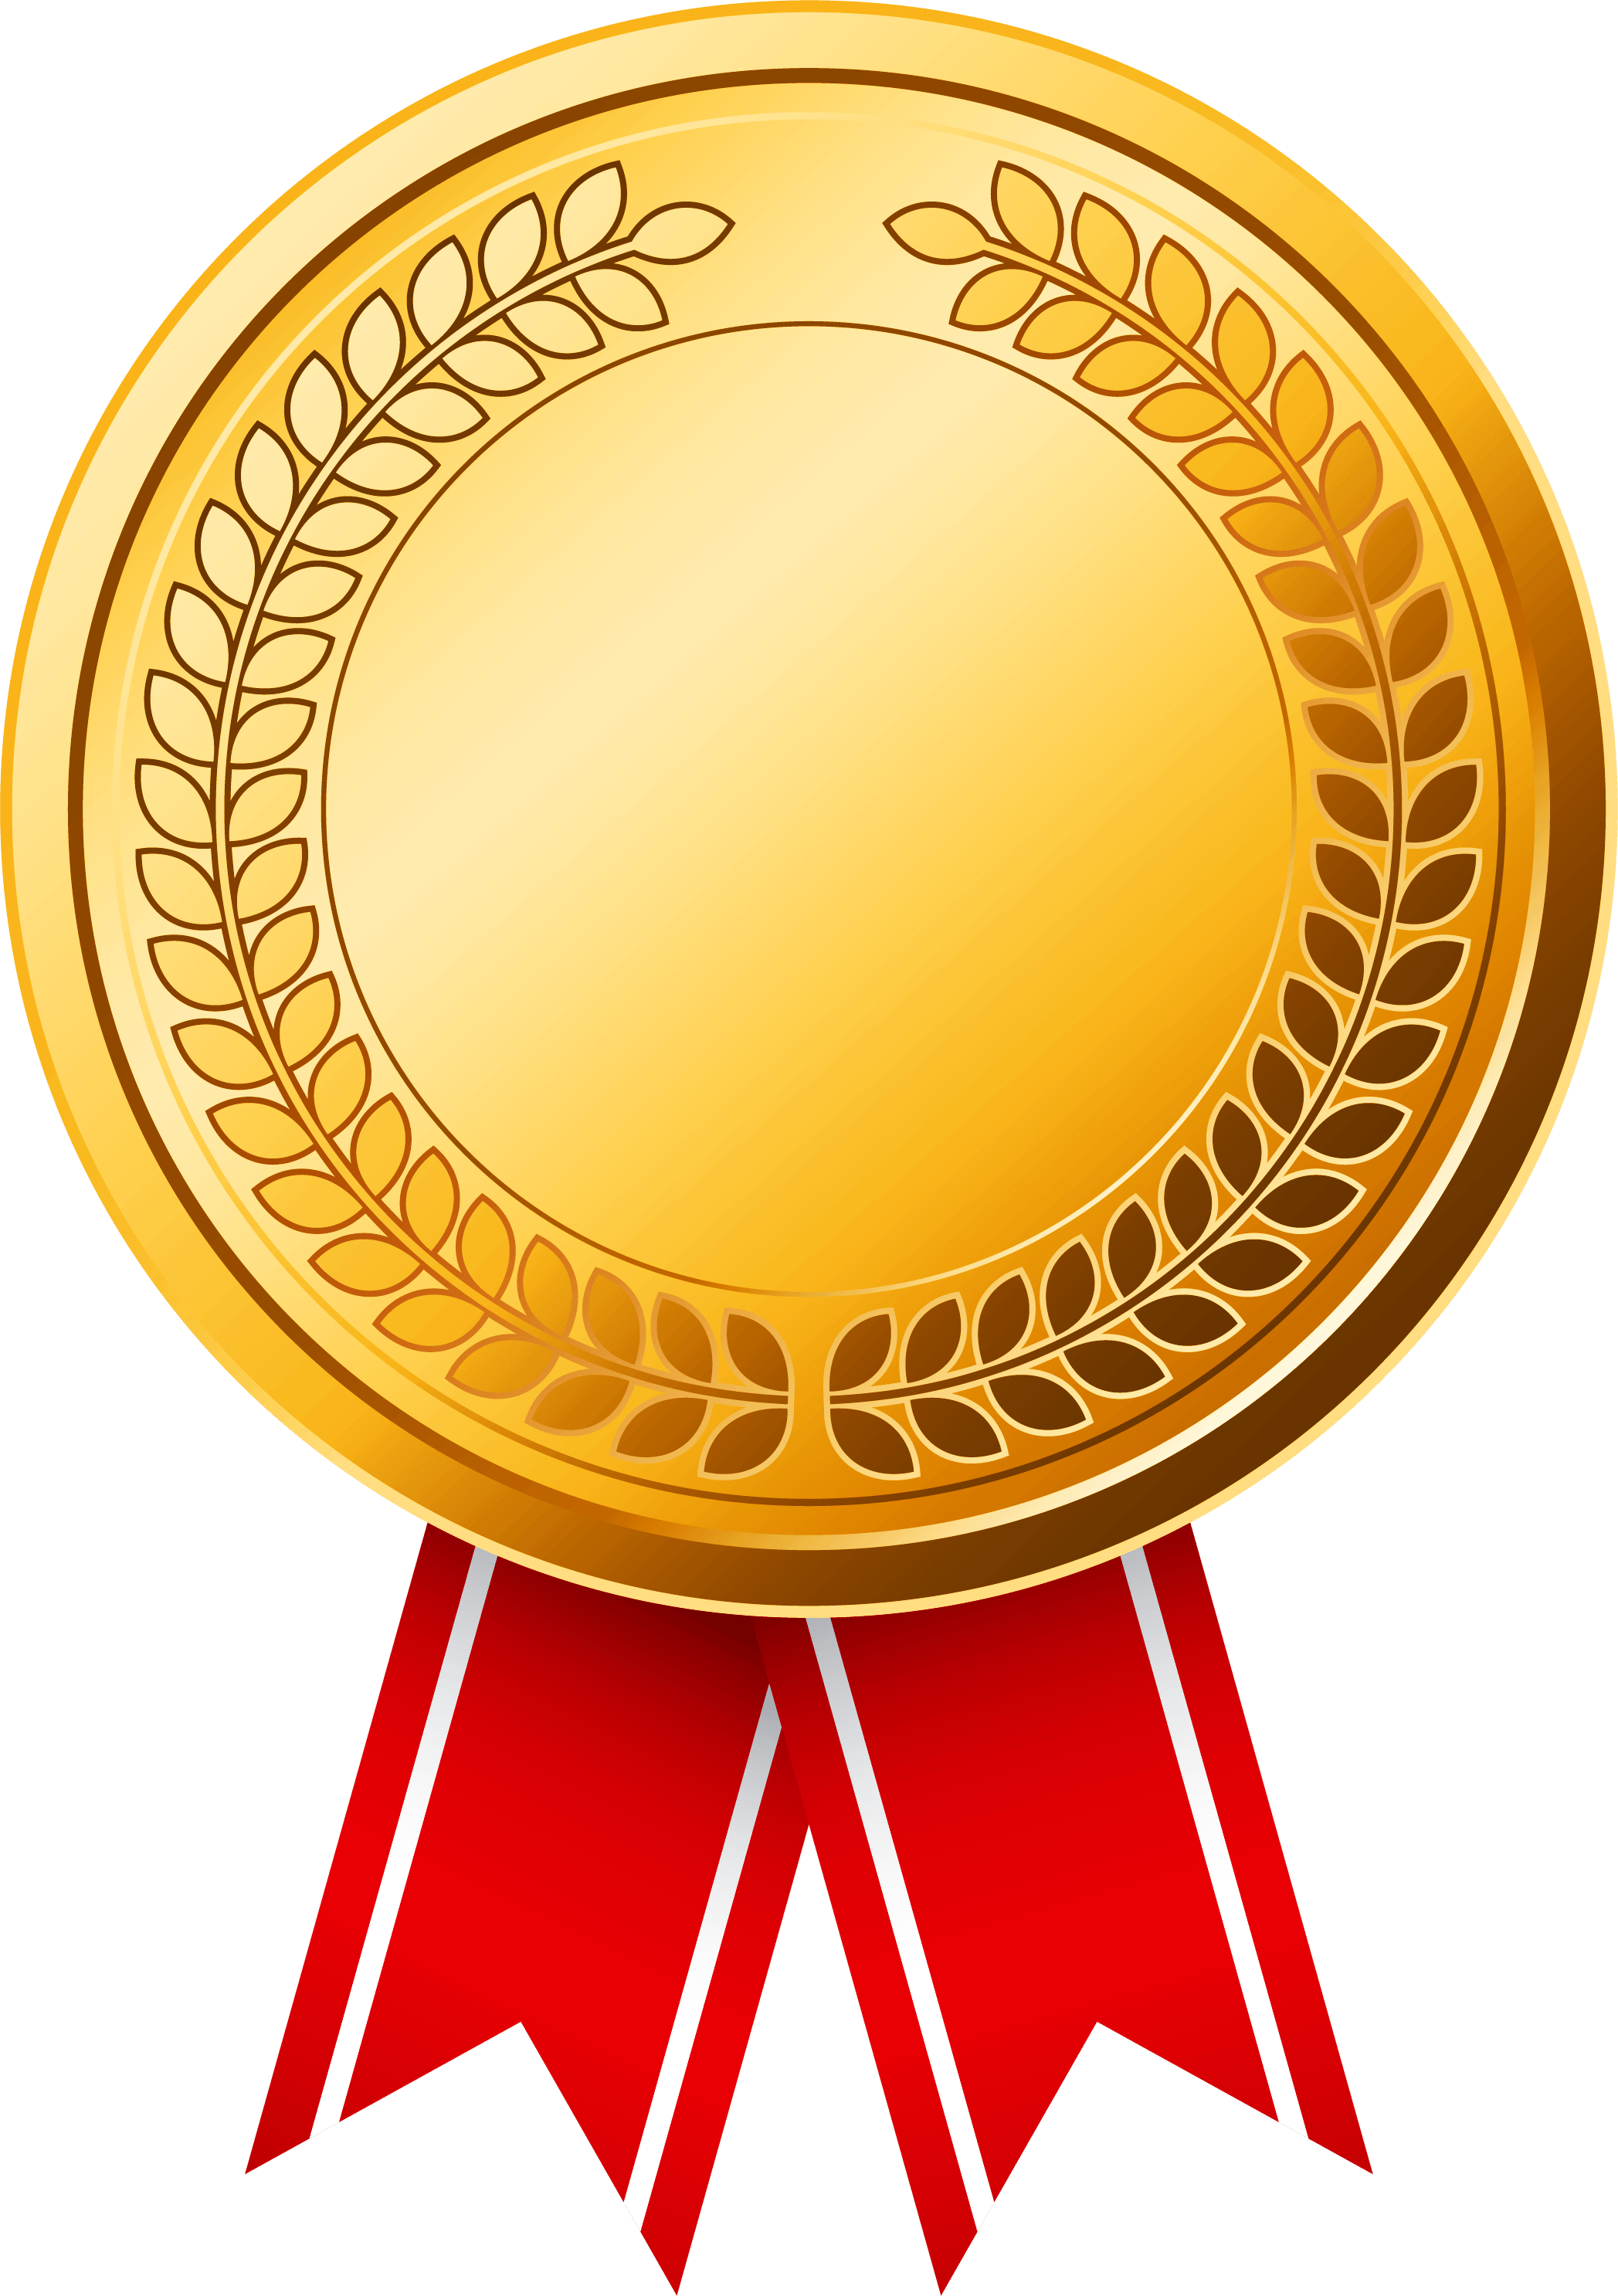 Medal PNG, Gold Medal, Olympic Medals, Medal Ribbon Clipart.